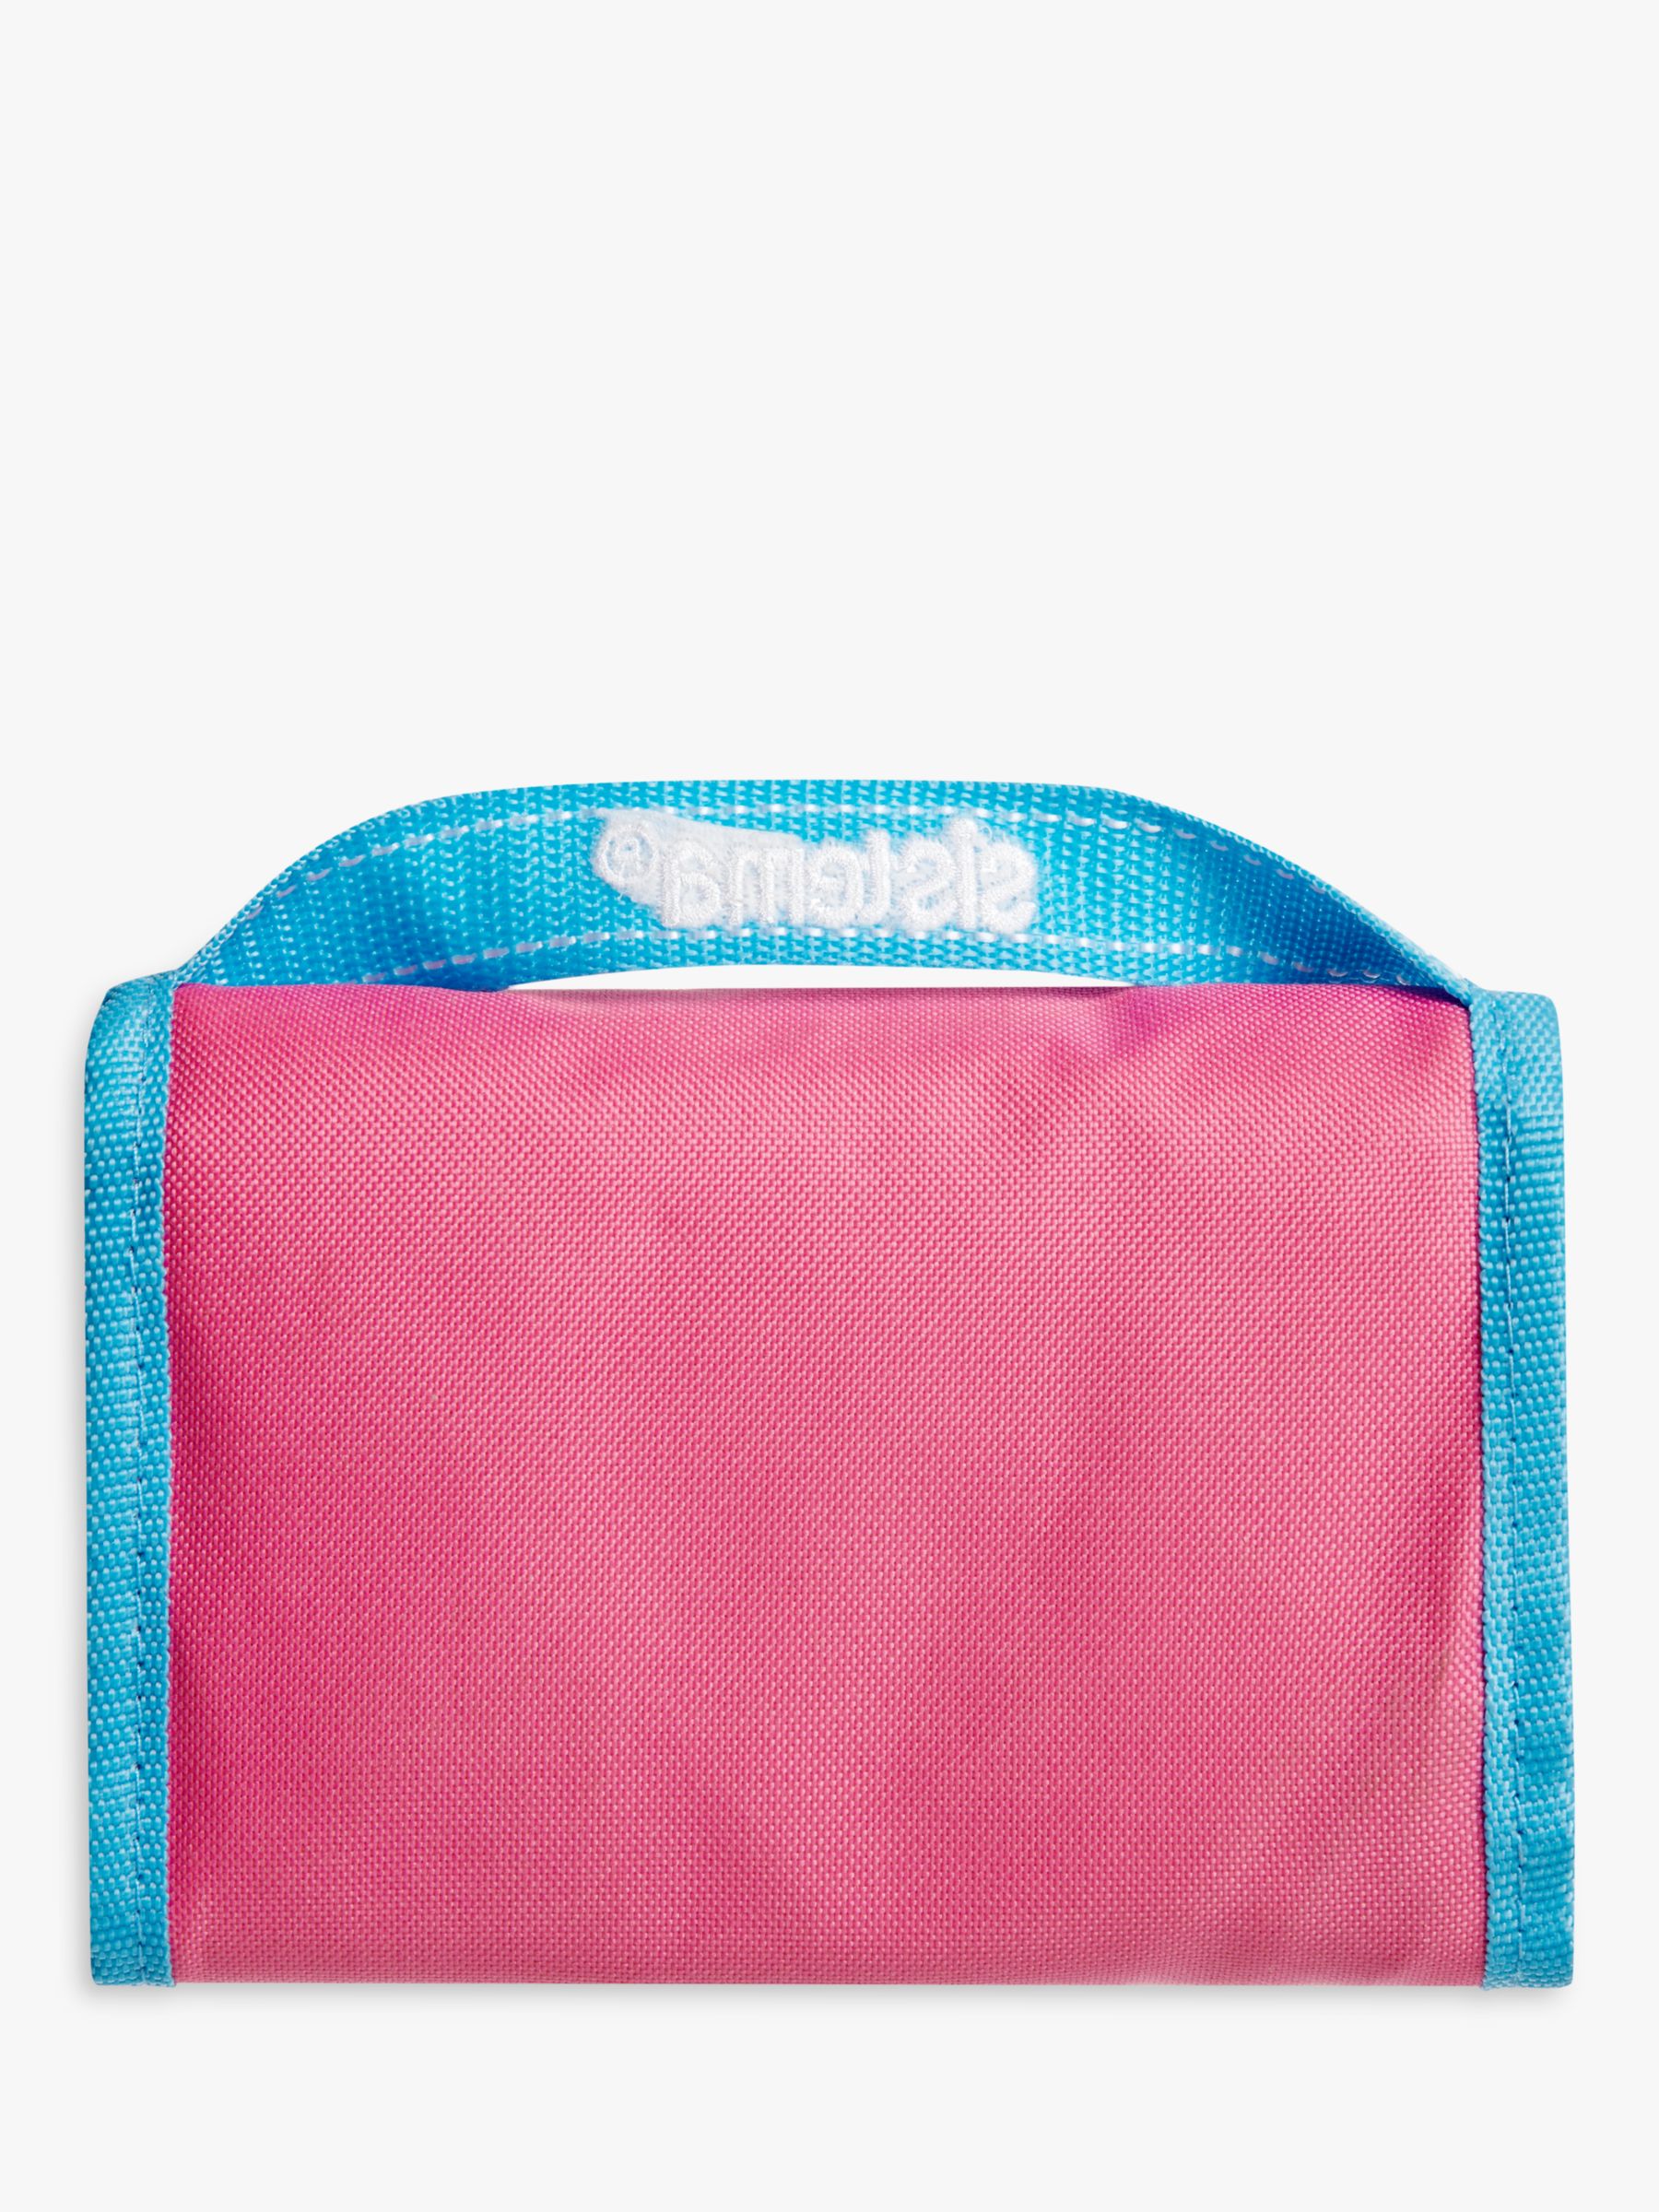 Buy Sistema Lunch To Go Lunch Bag, Assorted | John Lewis